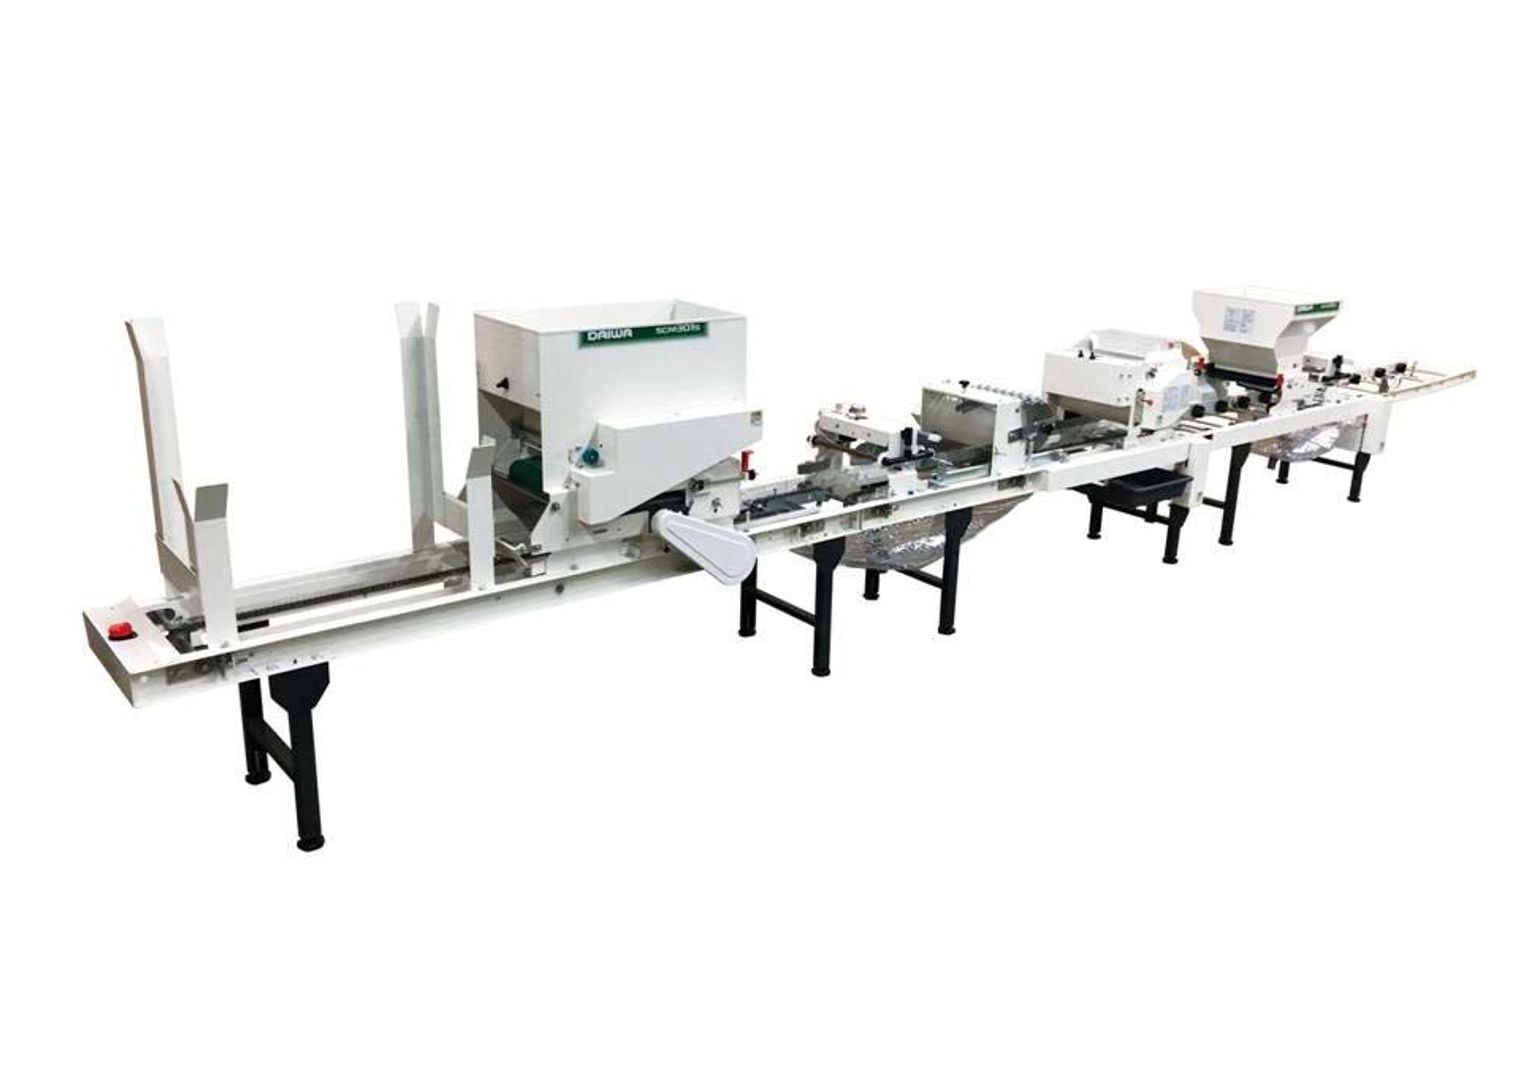 Vegetable Seed Sowing Machine, An Agricultural Machine which Automates  Sowing Seeds Onto a Tray of Soil – Products and Services – DAIWA SEIKO CO.,  LTD.